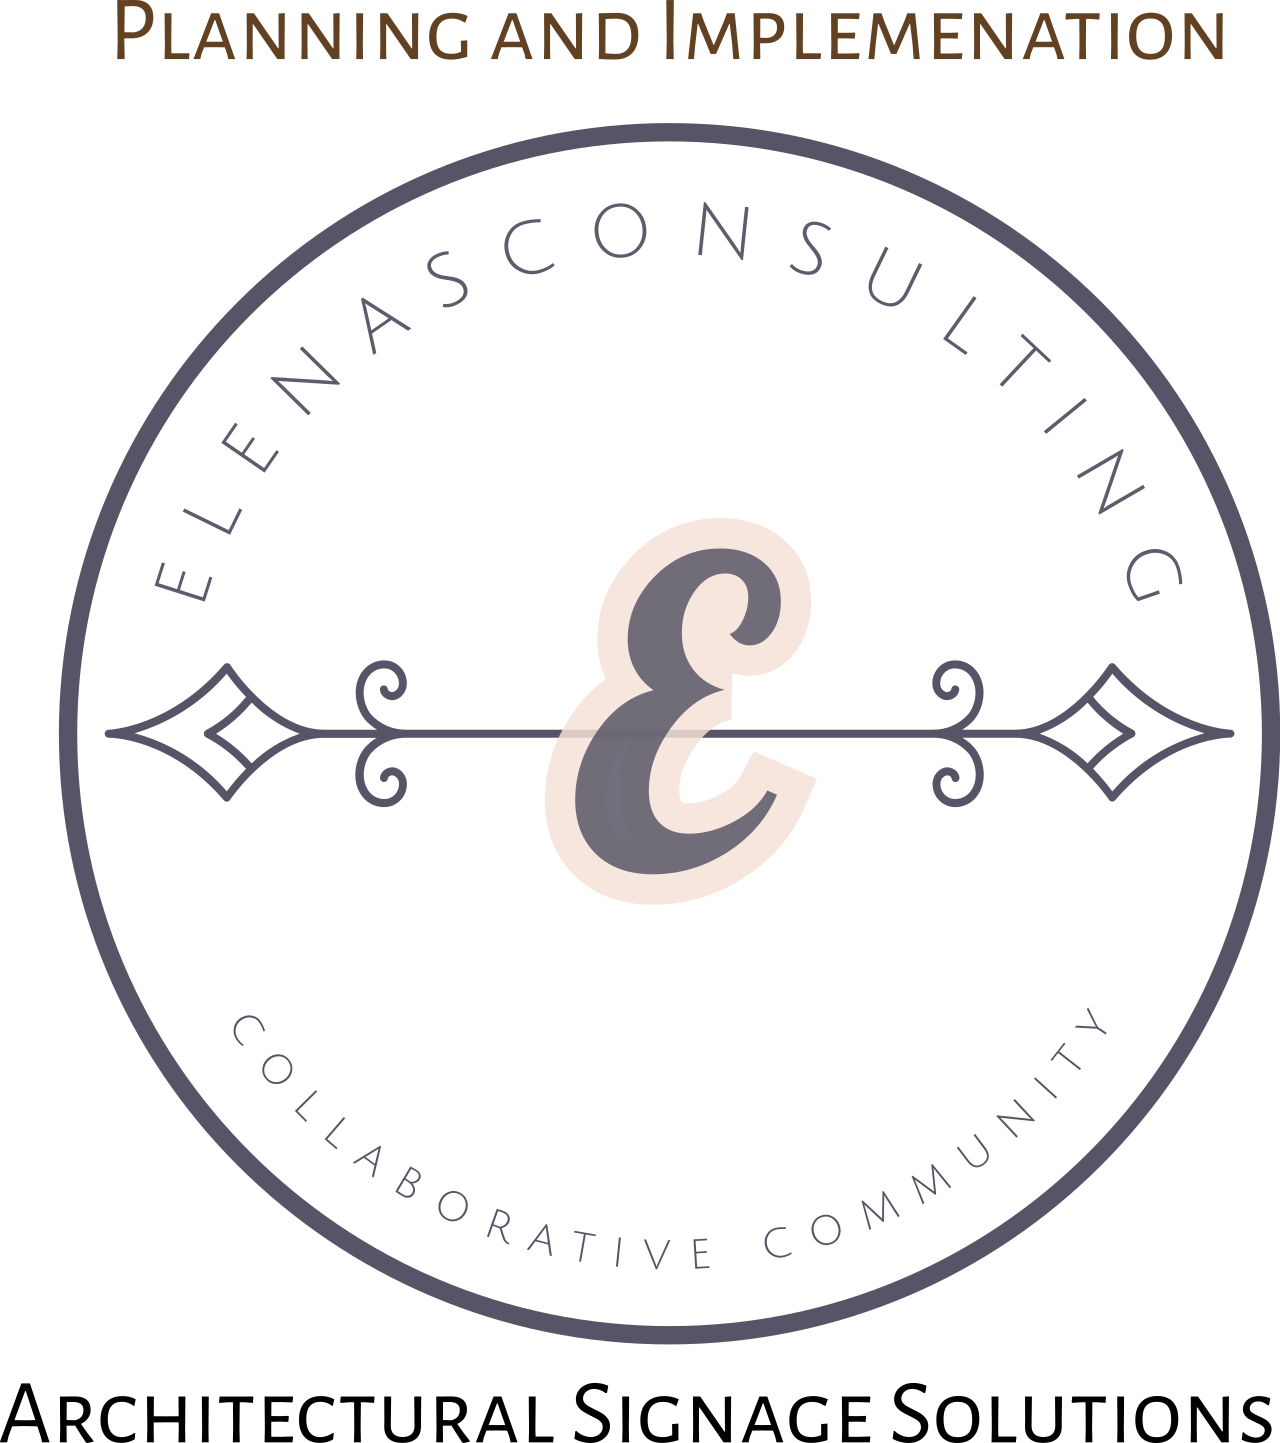 ELENASCONSULTING's web page